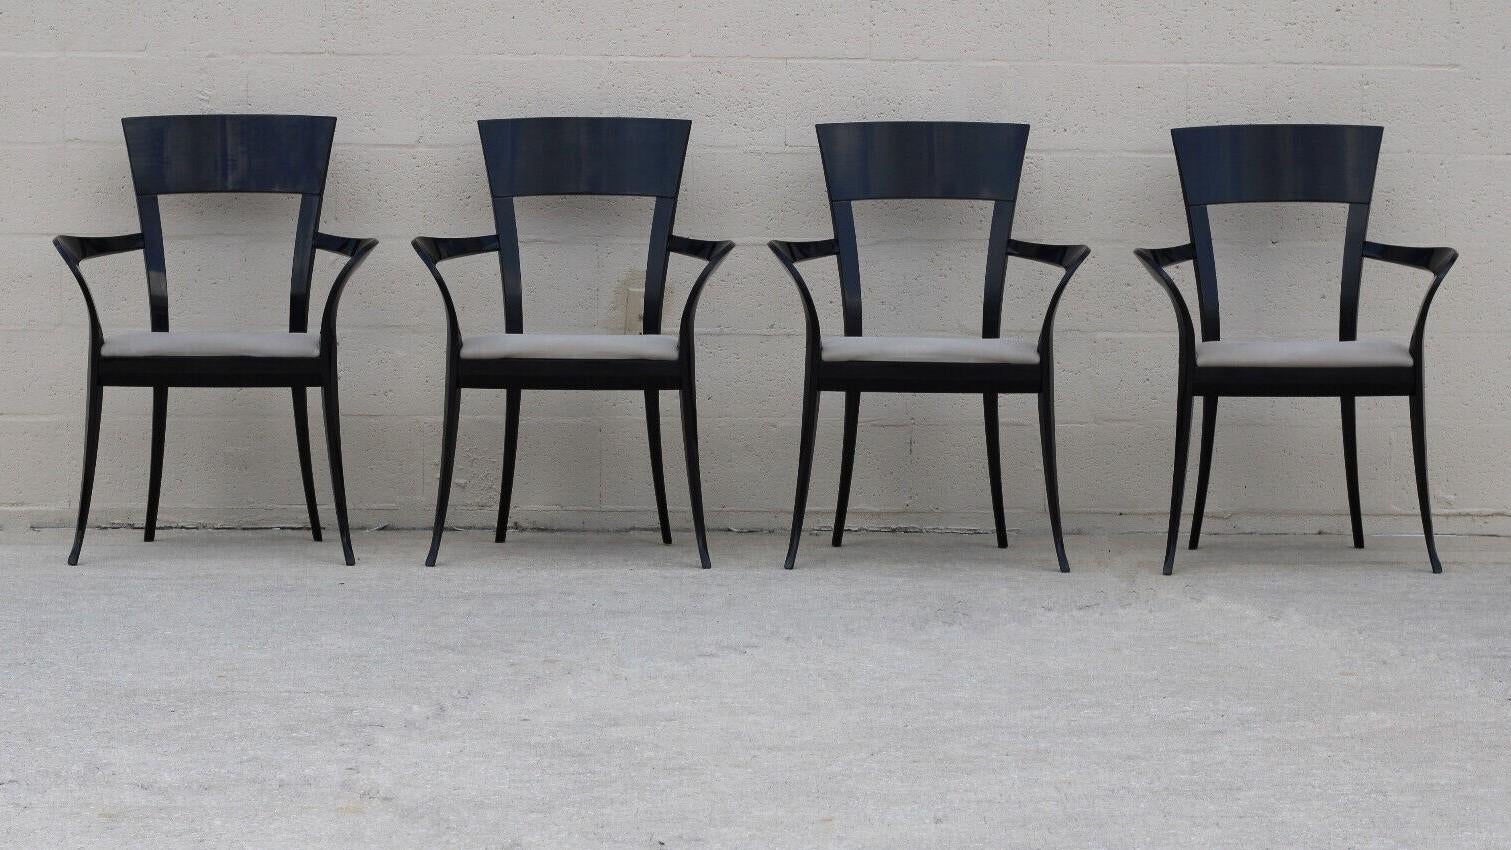 Eight Sculptural Black Lacquer Dining Chairs by Pietro Costantini, Made in Italy For Sale 2